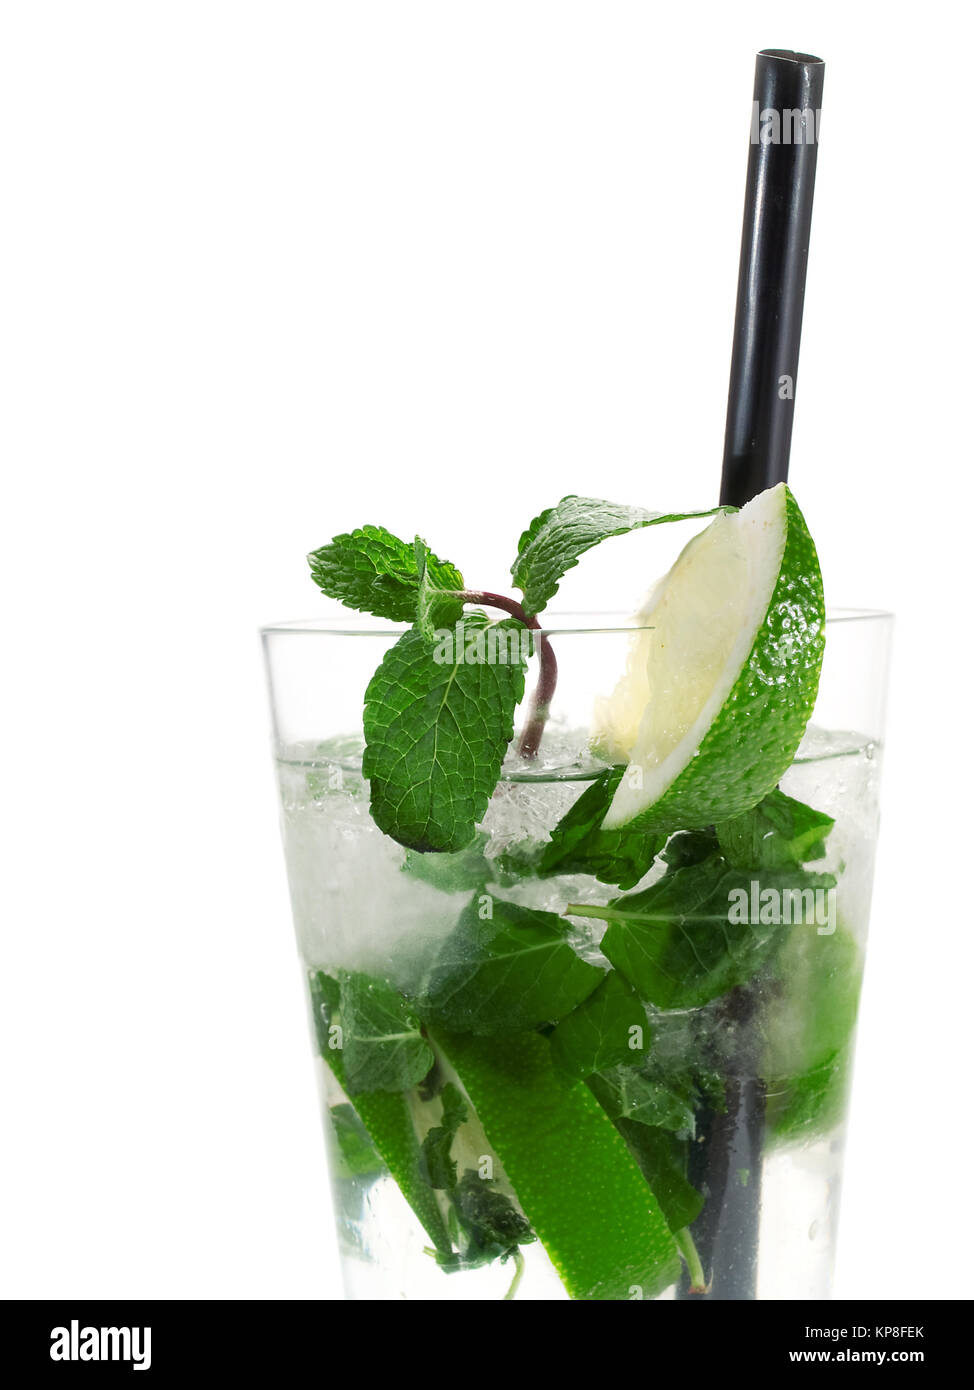 Cocktail Collection - Mojito,Cocktail Collection - Mojito,Cocktail Collection - Mojito,Cocktail Collection - Mojito,Cocktail Collection - Mojito,Cocktail Collection - Mojito,Cocktail Collection - Mojito,Cocktail Collection - Mojito Foto Stock